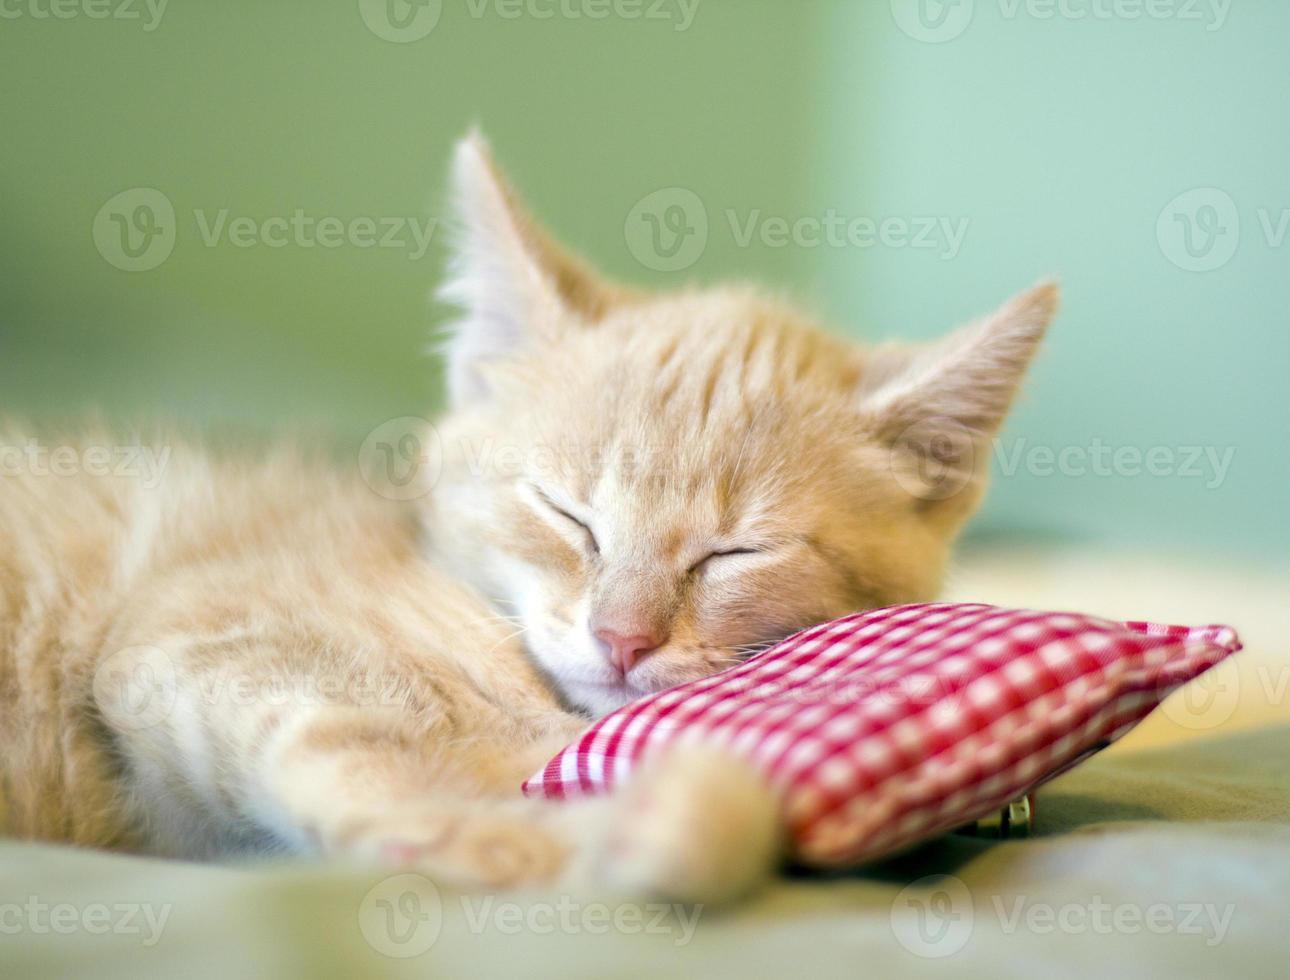 A baby cat taking a nap supported by a little pillow  photo